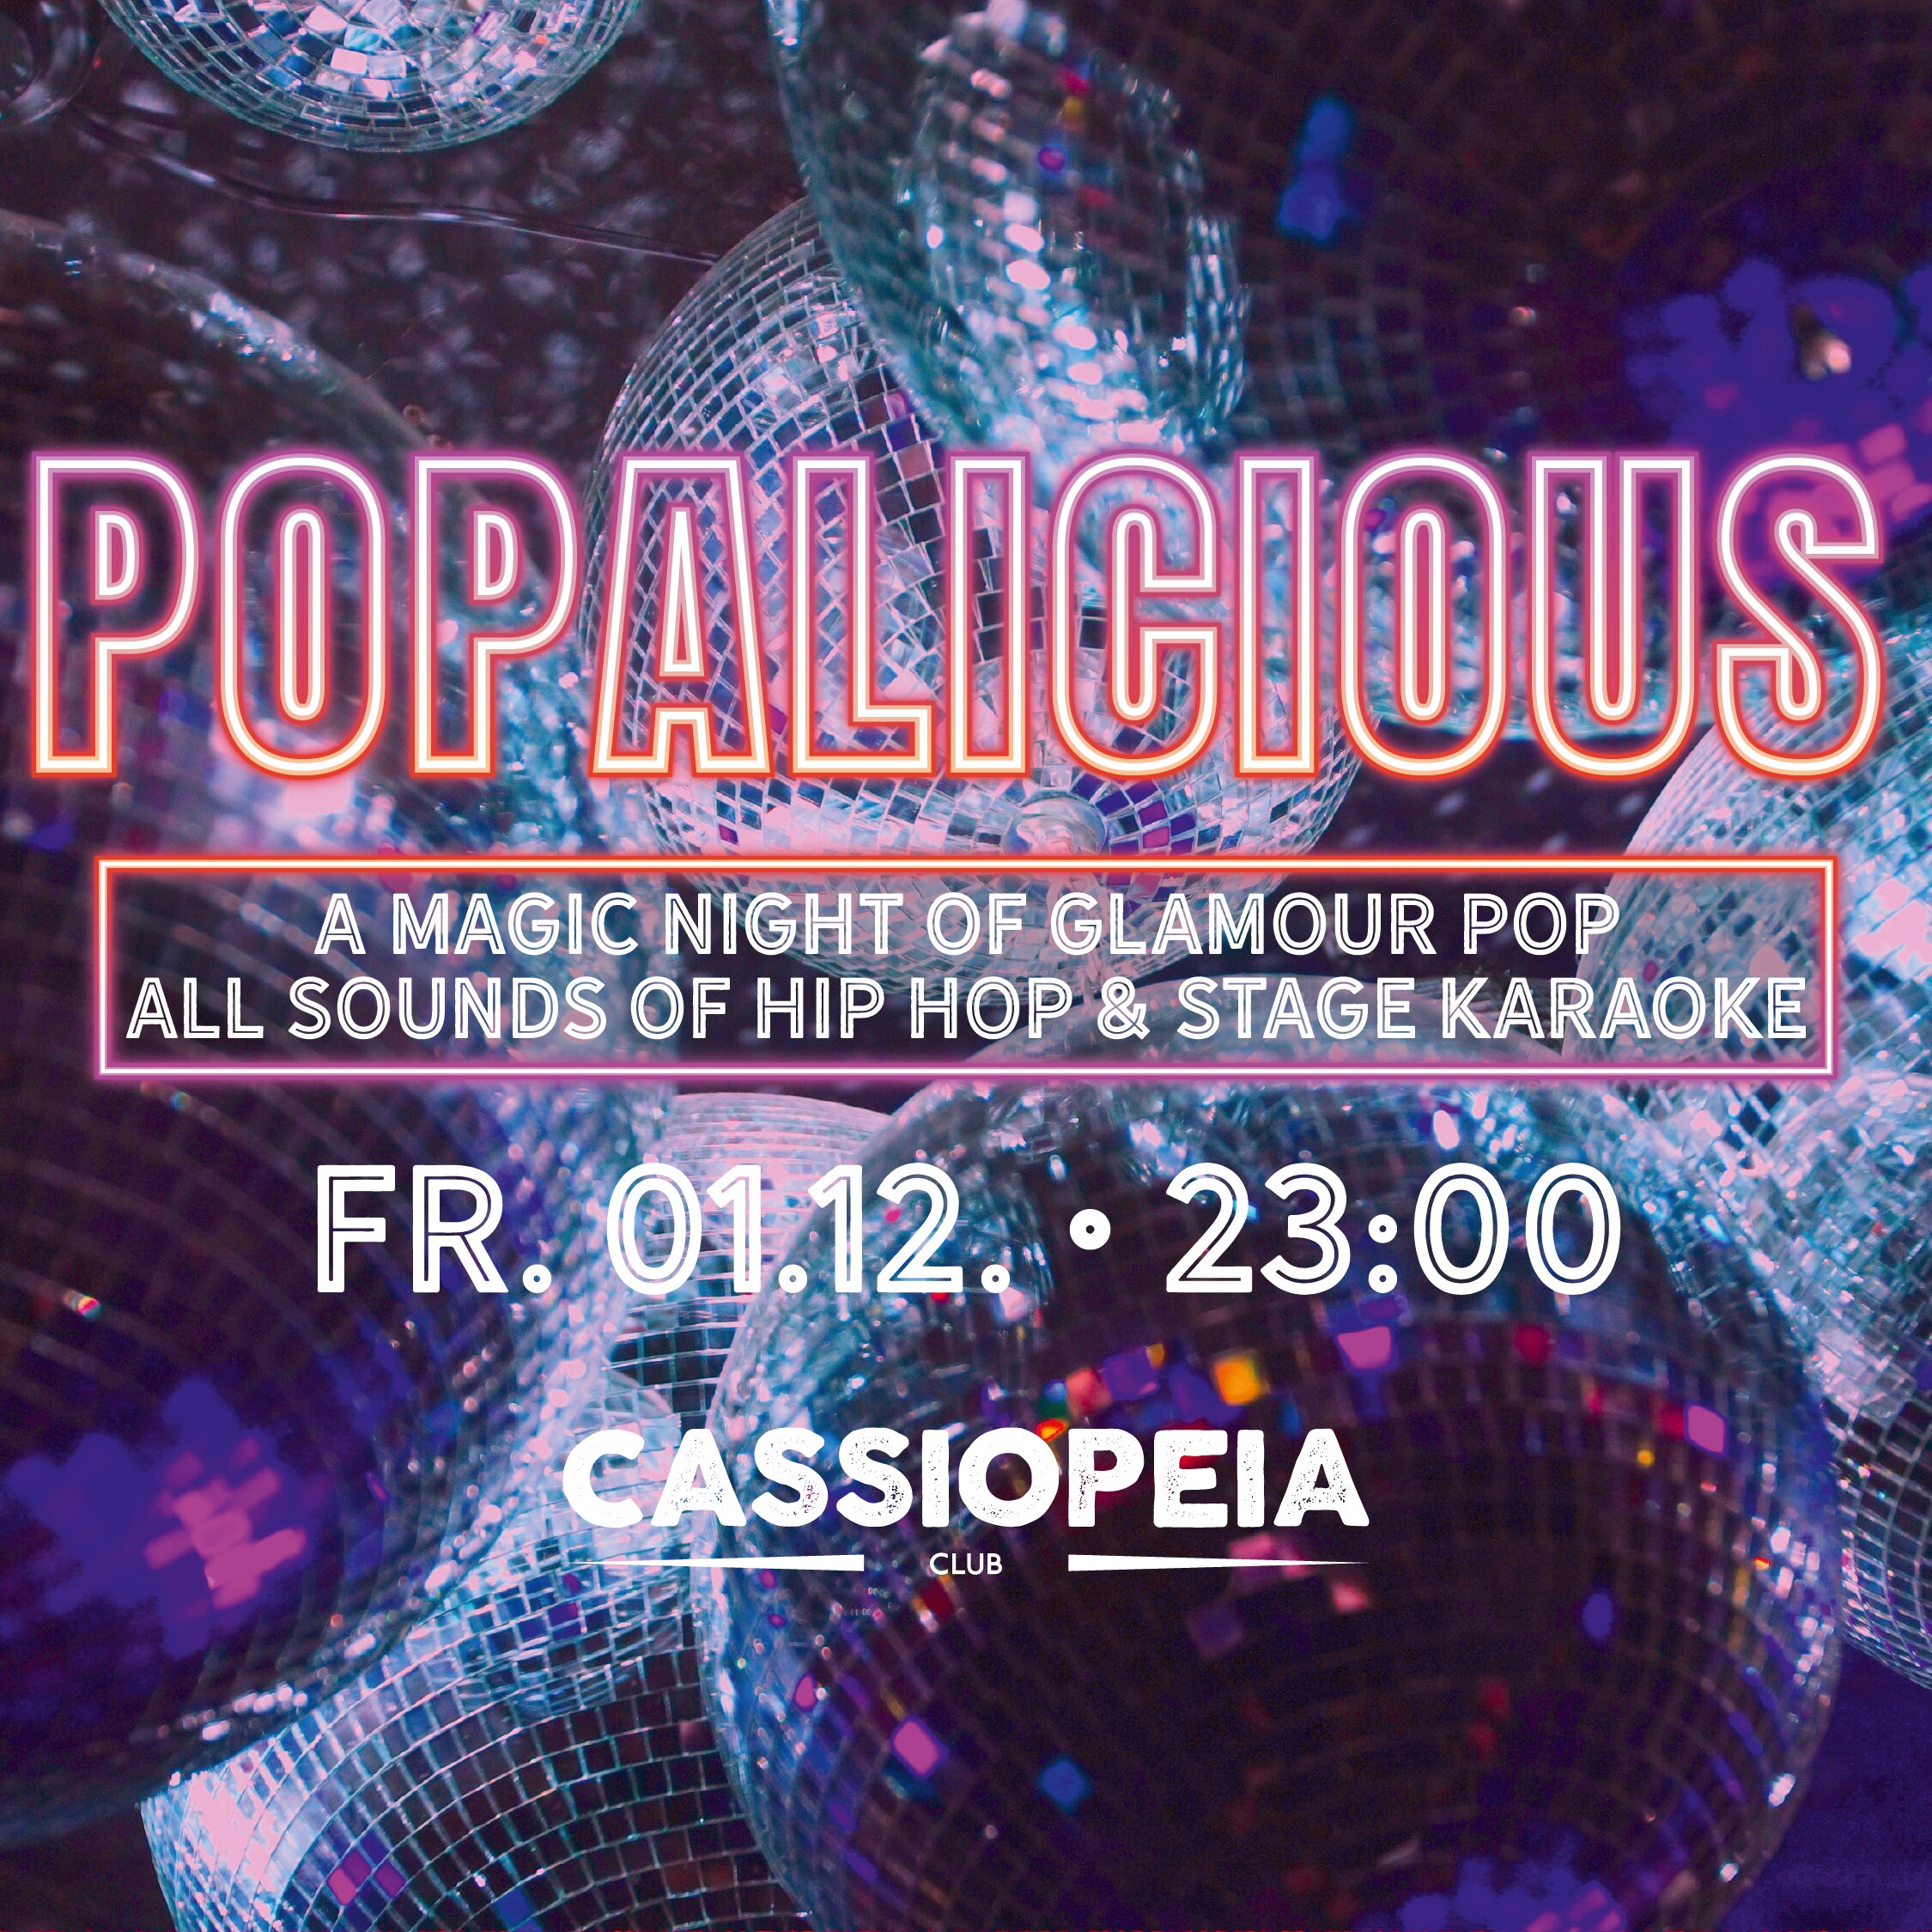 Cassiopeia 01.12.2023 Popalicious - A Magic Night of Glamour Pop, Hip-Hop & Stage Karaoke